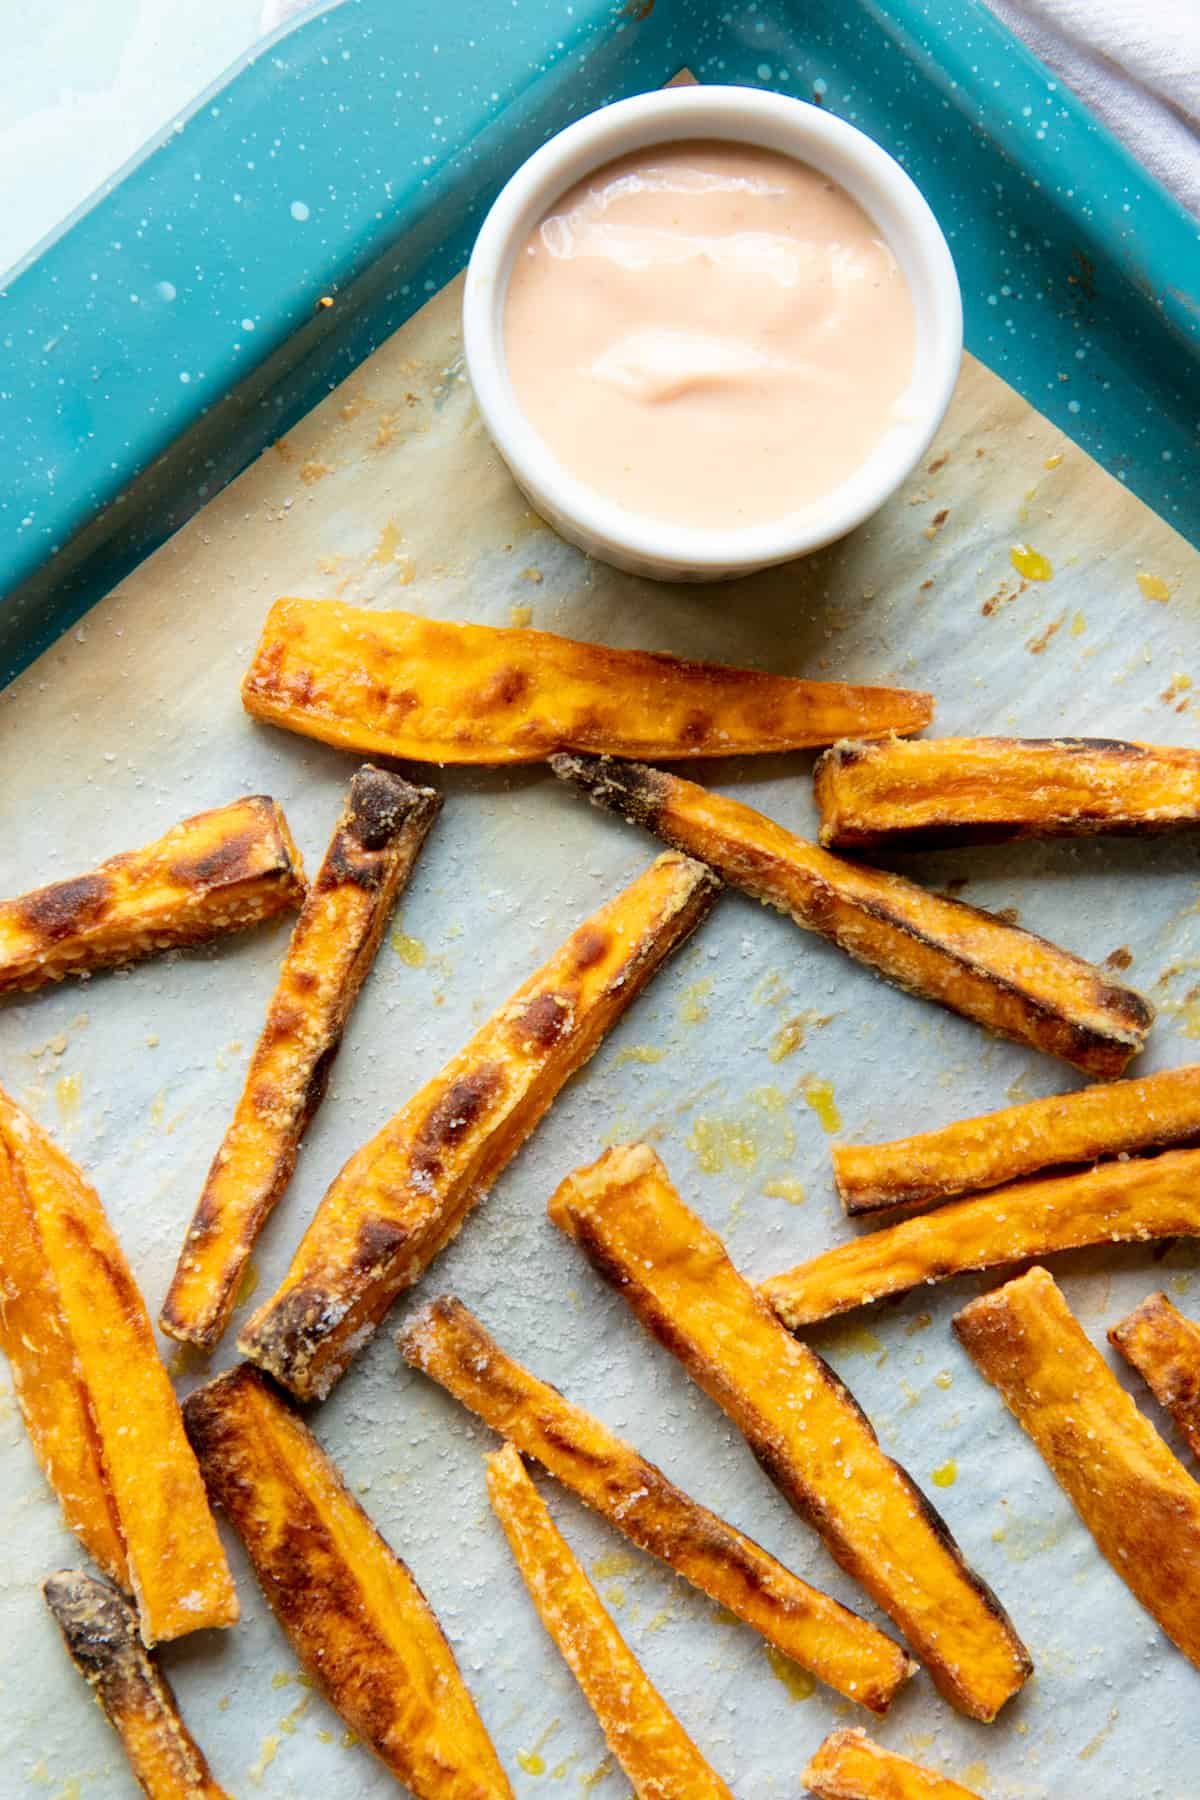 Baked fries sit on a baking sheet next to a small ramekin of dipping sauce.